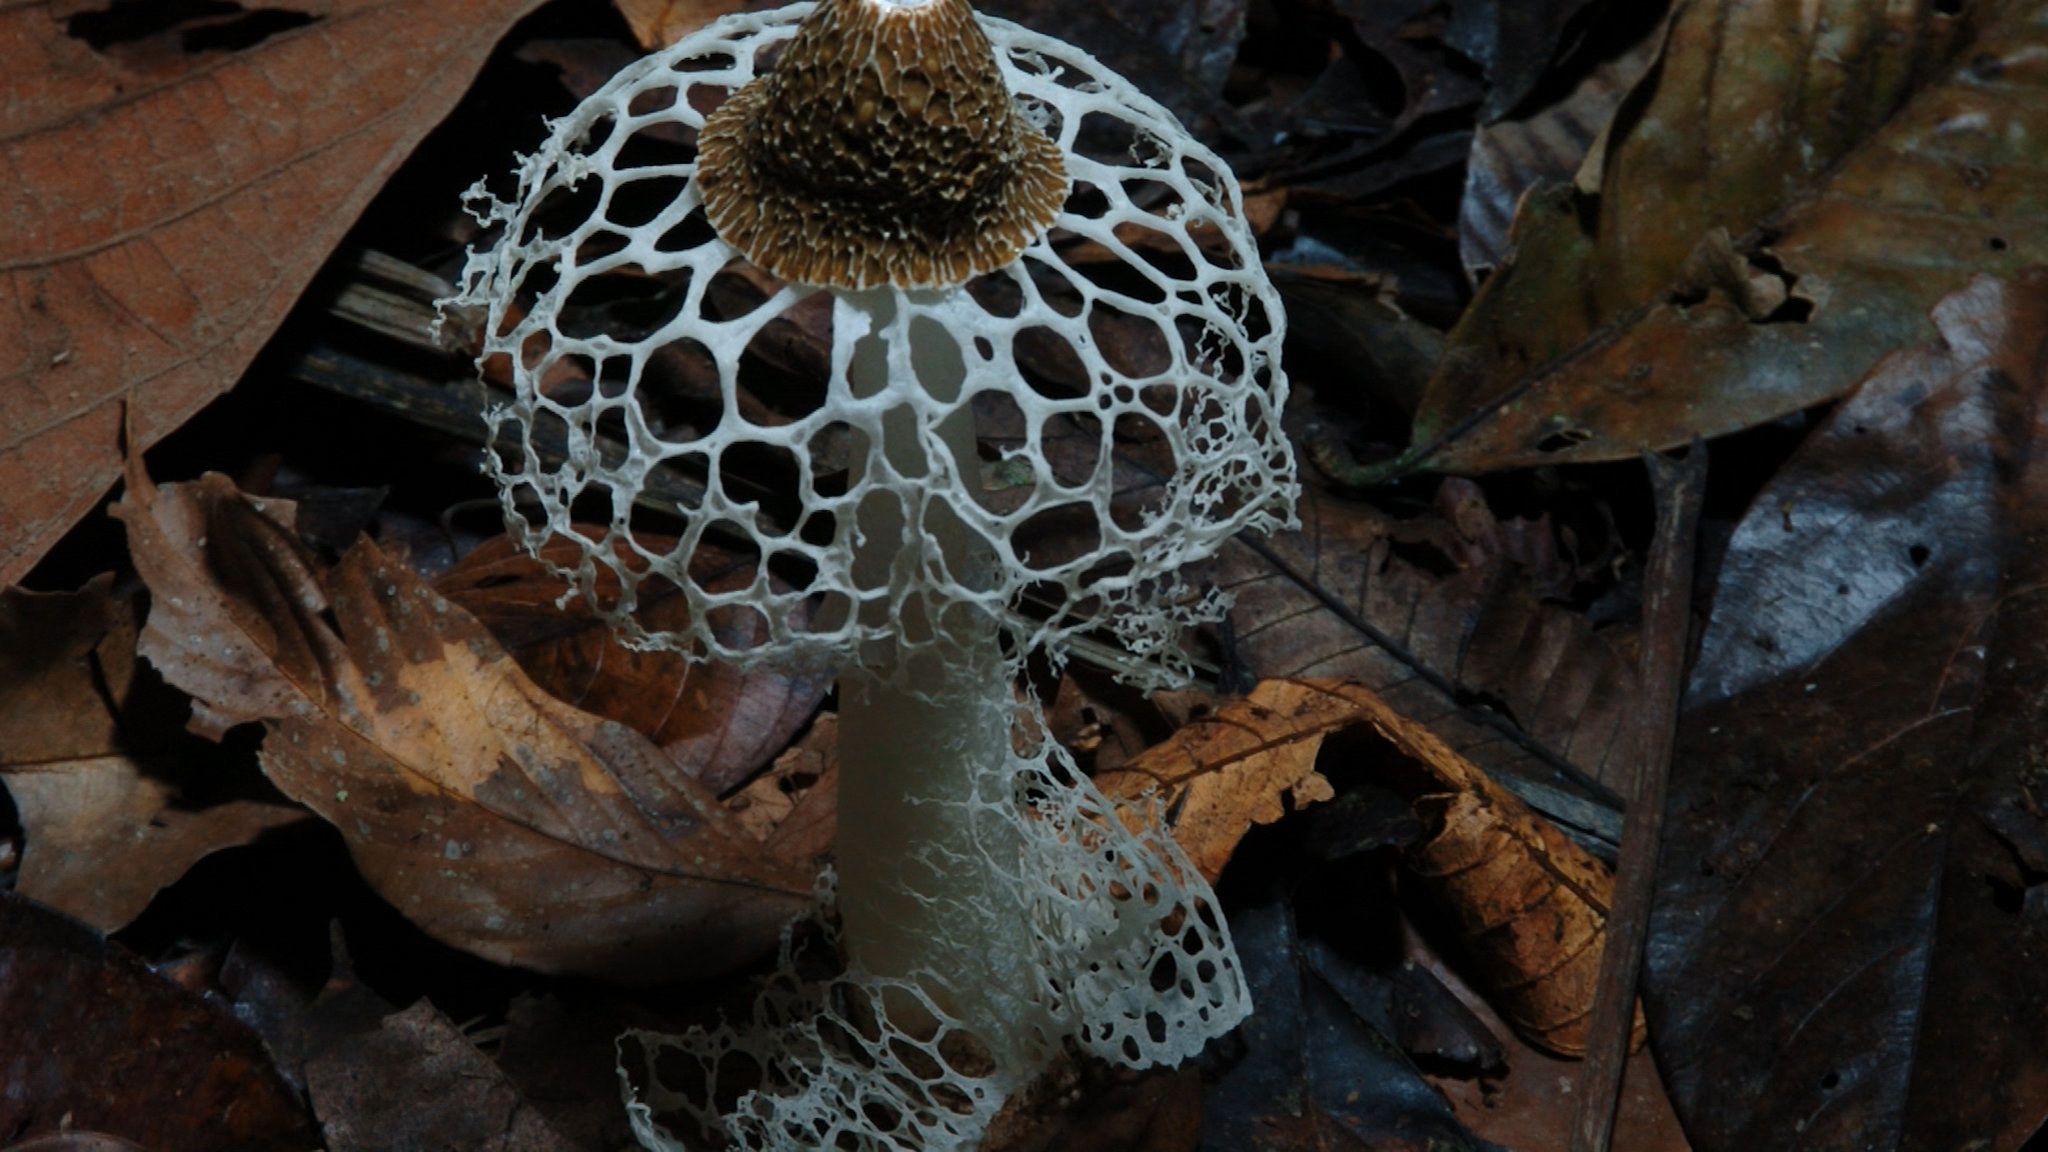 A cool mushroom with holes in the top